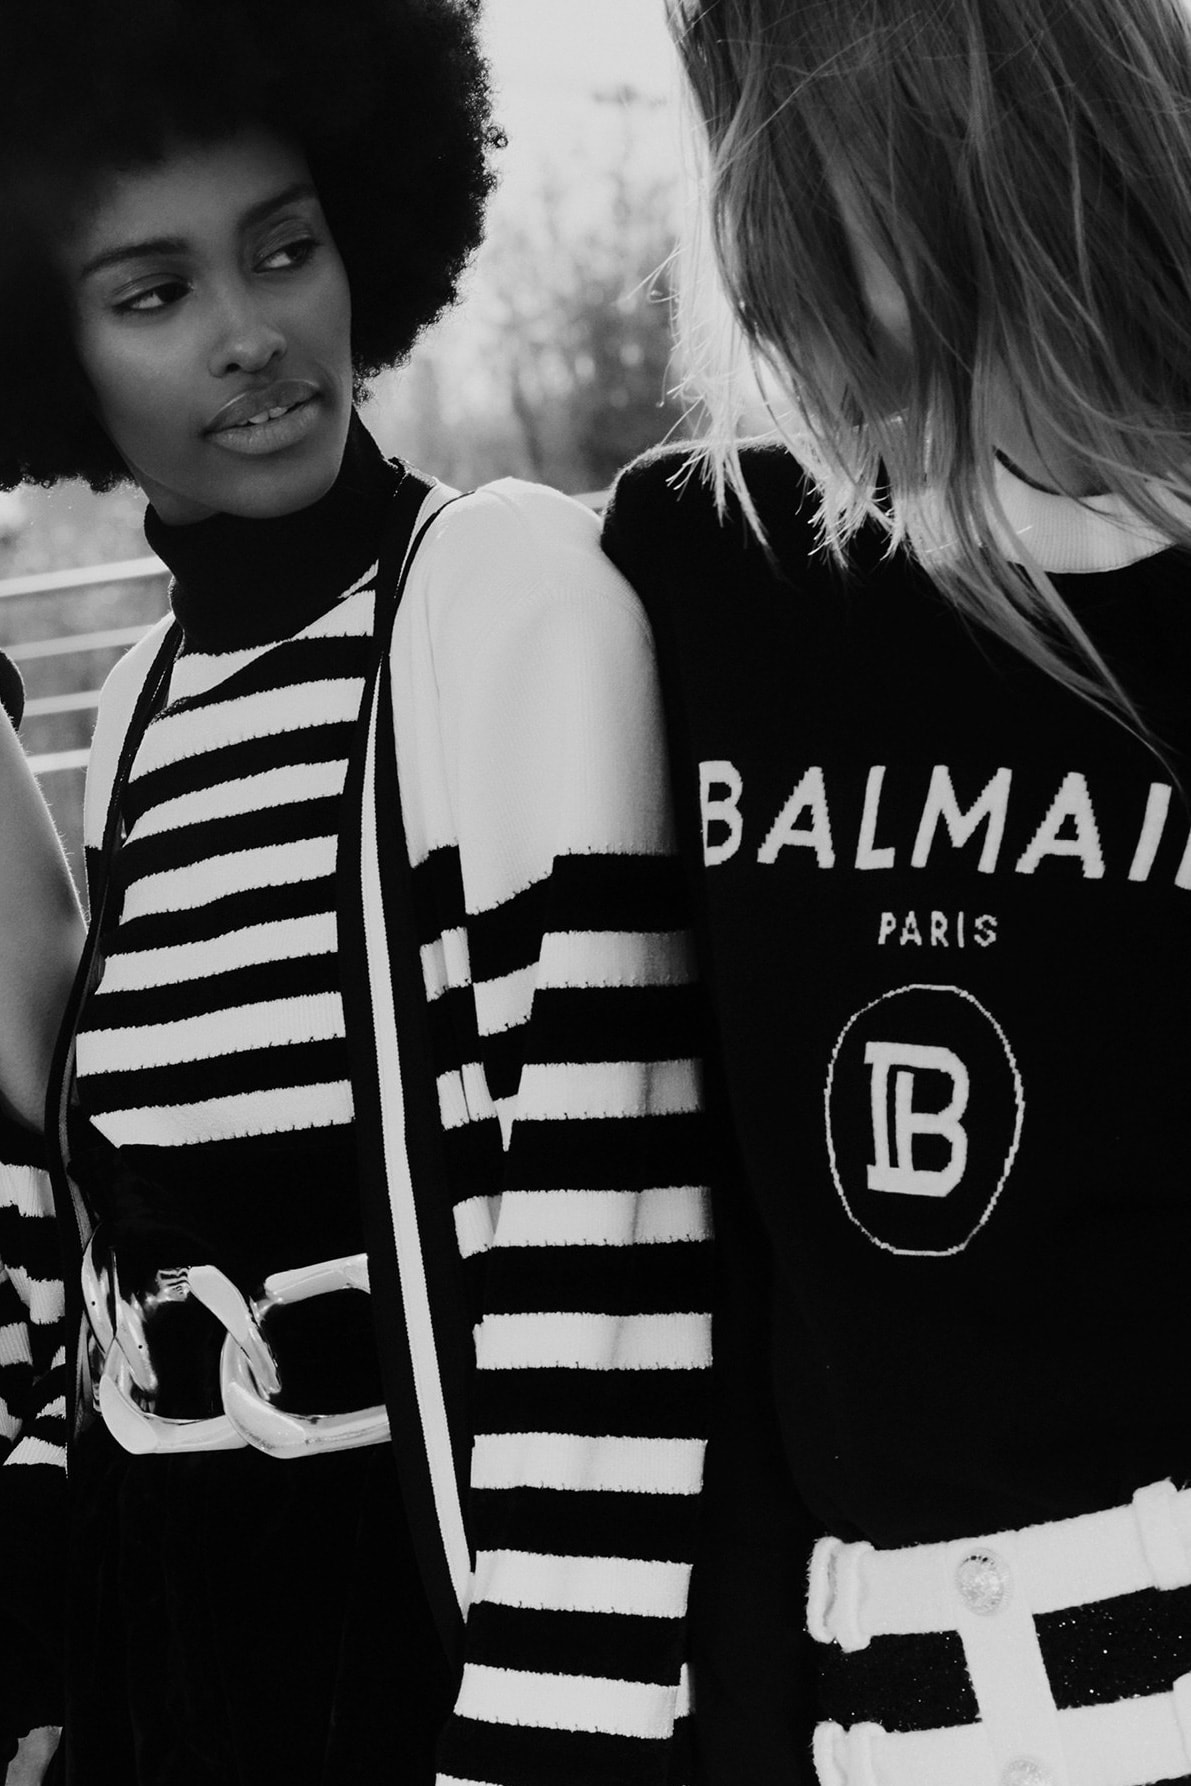 balmain new logo pre-fall 2019 collection olivier rousteing